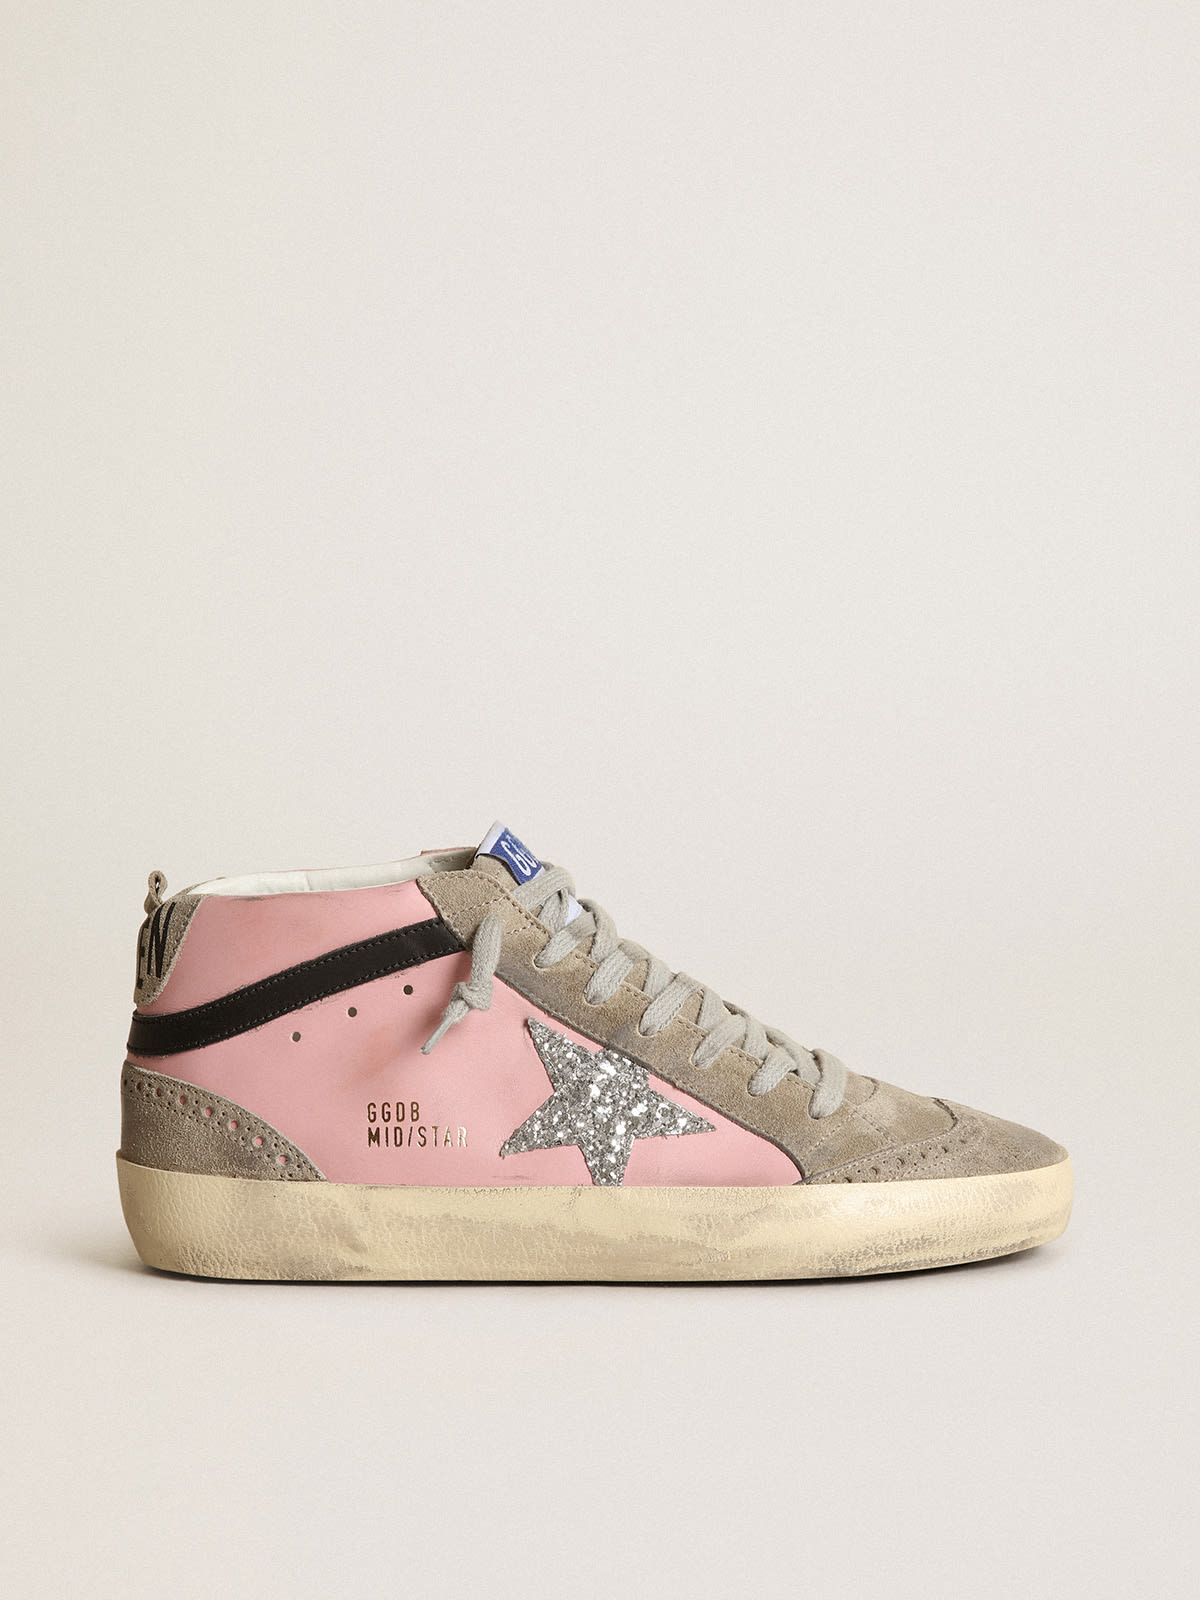 Golden Goose - Women's Mid Star LTD in pink leather with glitter star and black flash in 